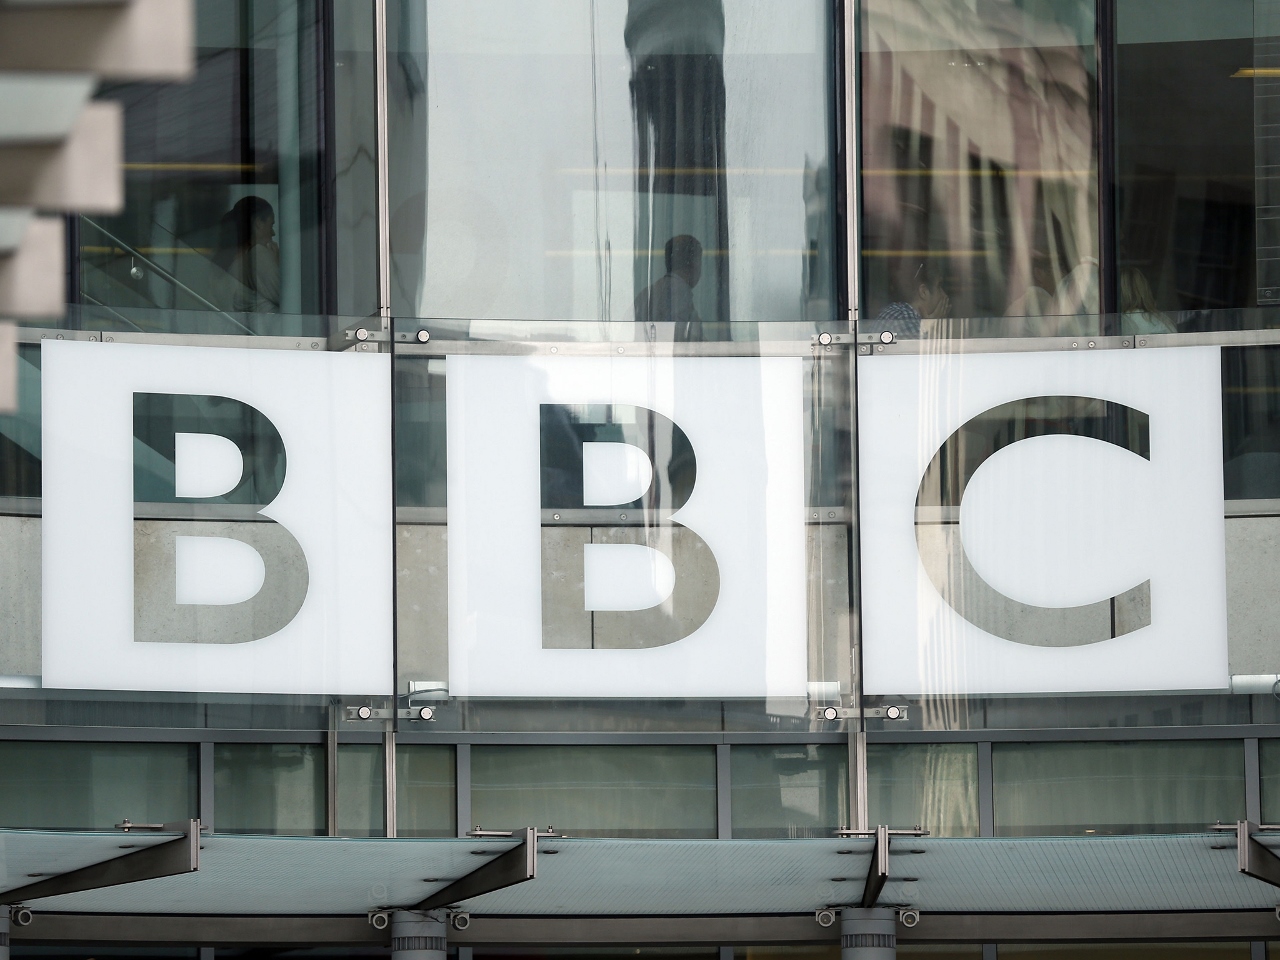 The tax payer-funded BBC was compelled by the government to publish the salaries of on-air talent, which had previously been secret